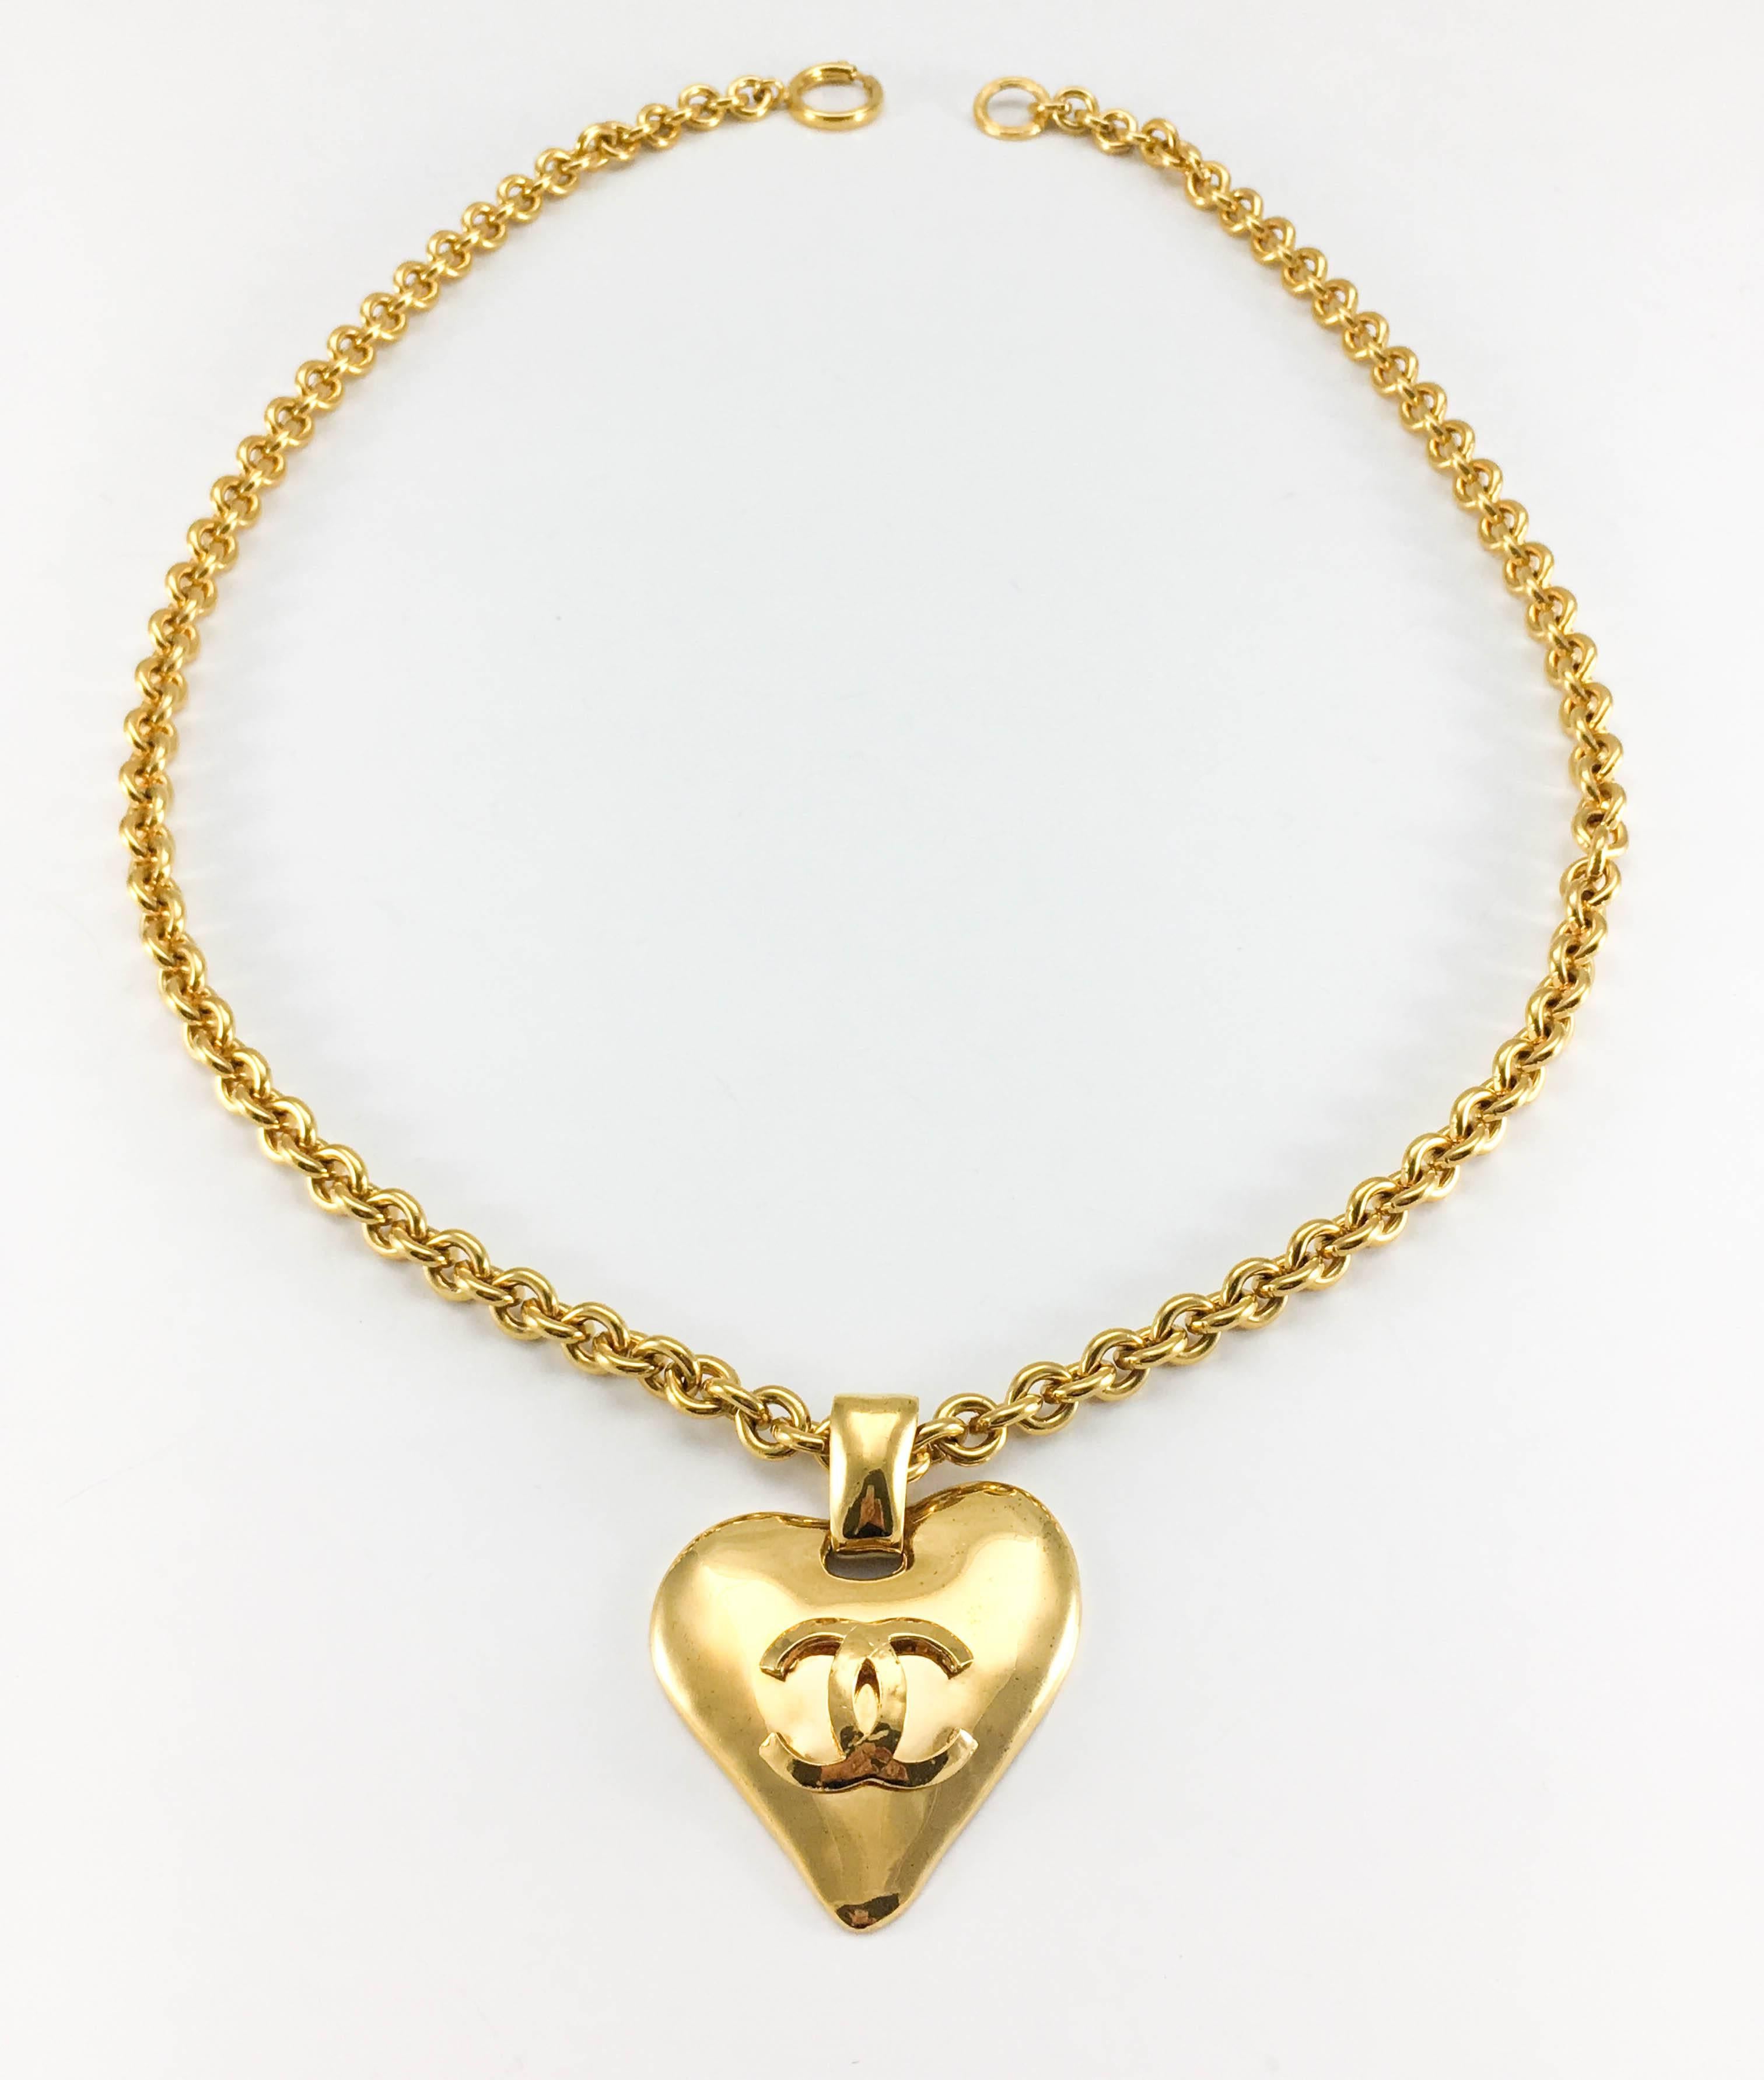 Women's 1993 Chanel Heart-Shaped Gold-Plated Pendant Necklace